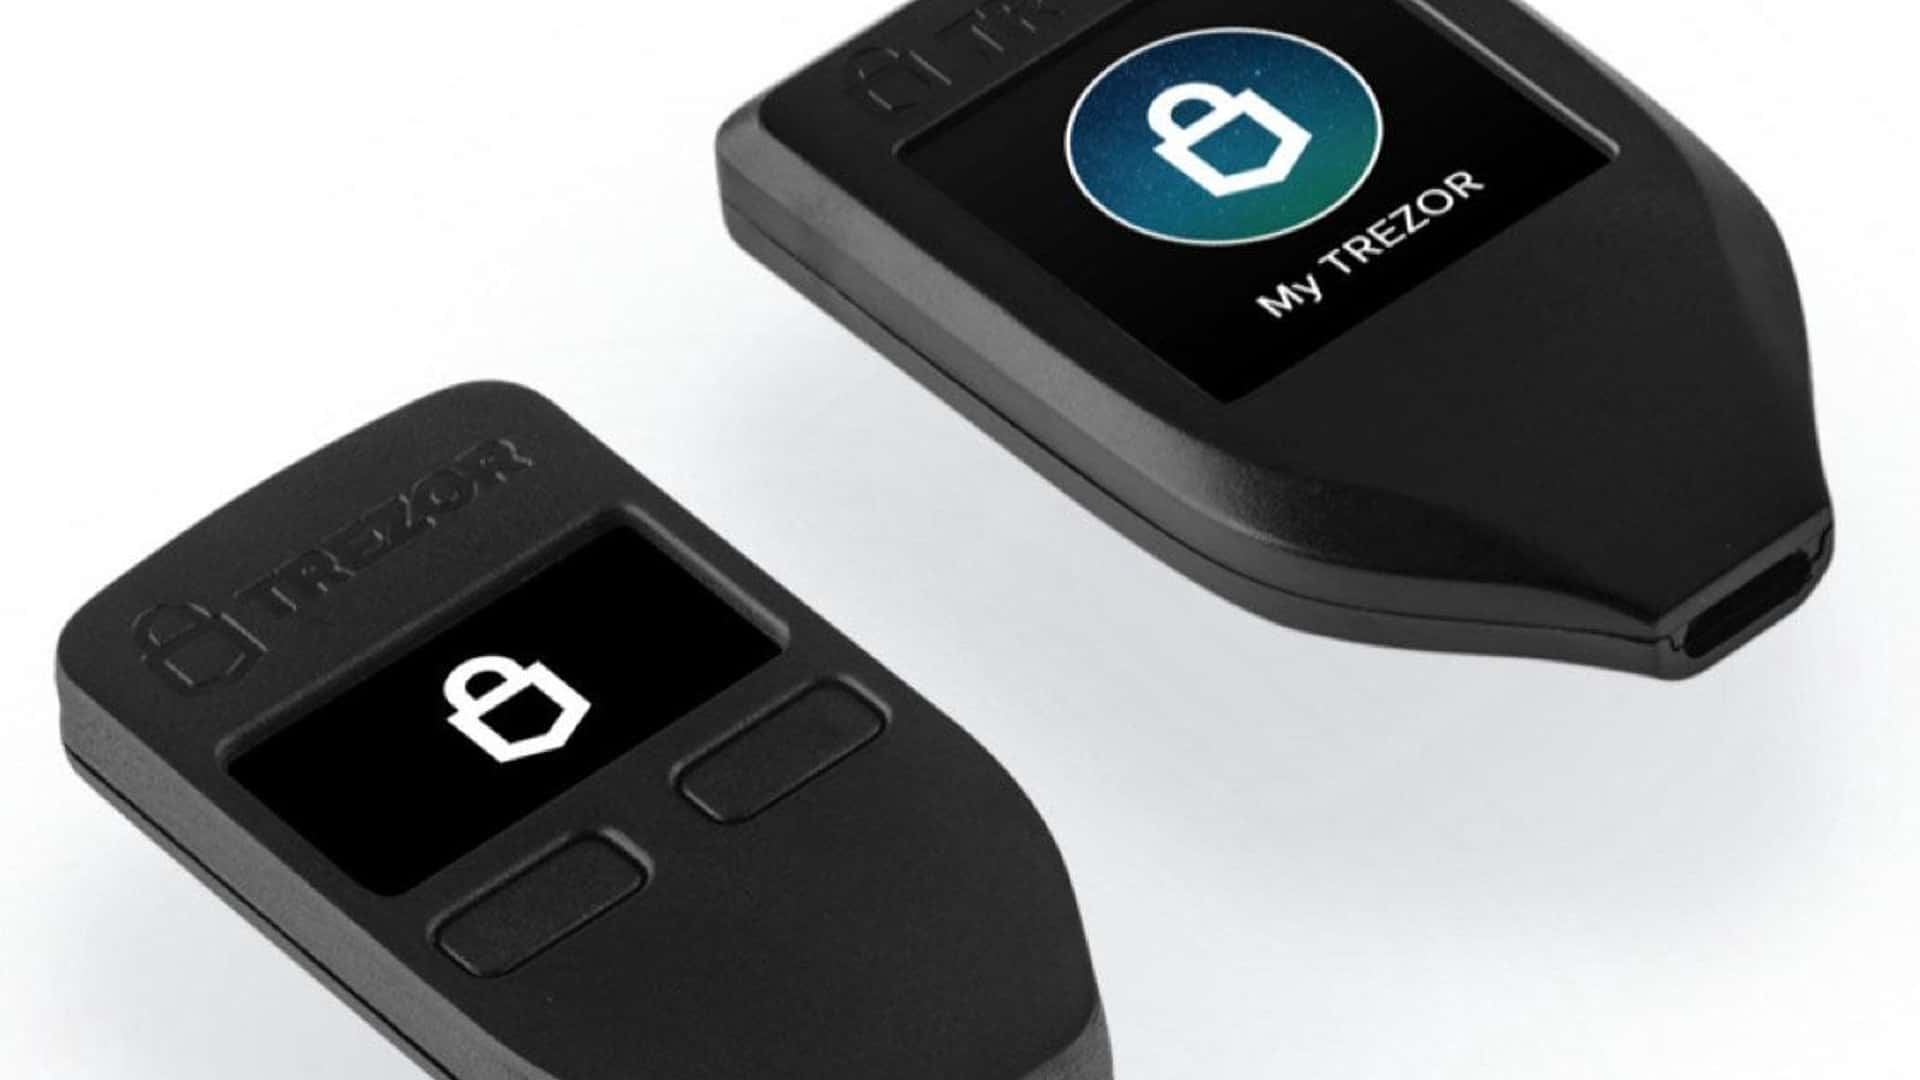 The benefits of a Trezor wallet are manifold. But when it comes to Trezor One vs the Model T, which one should you choose?